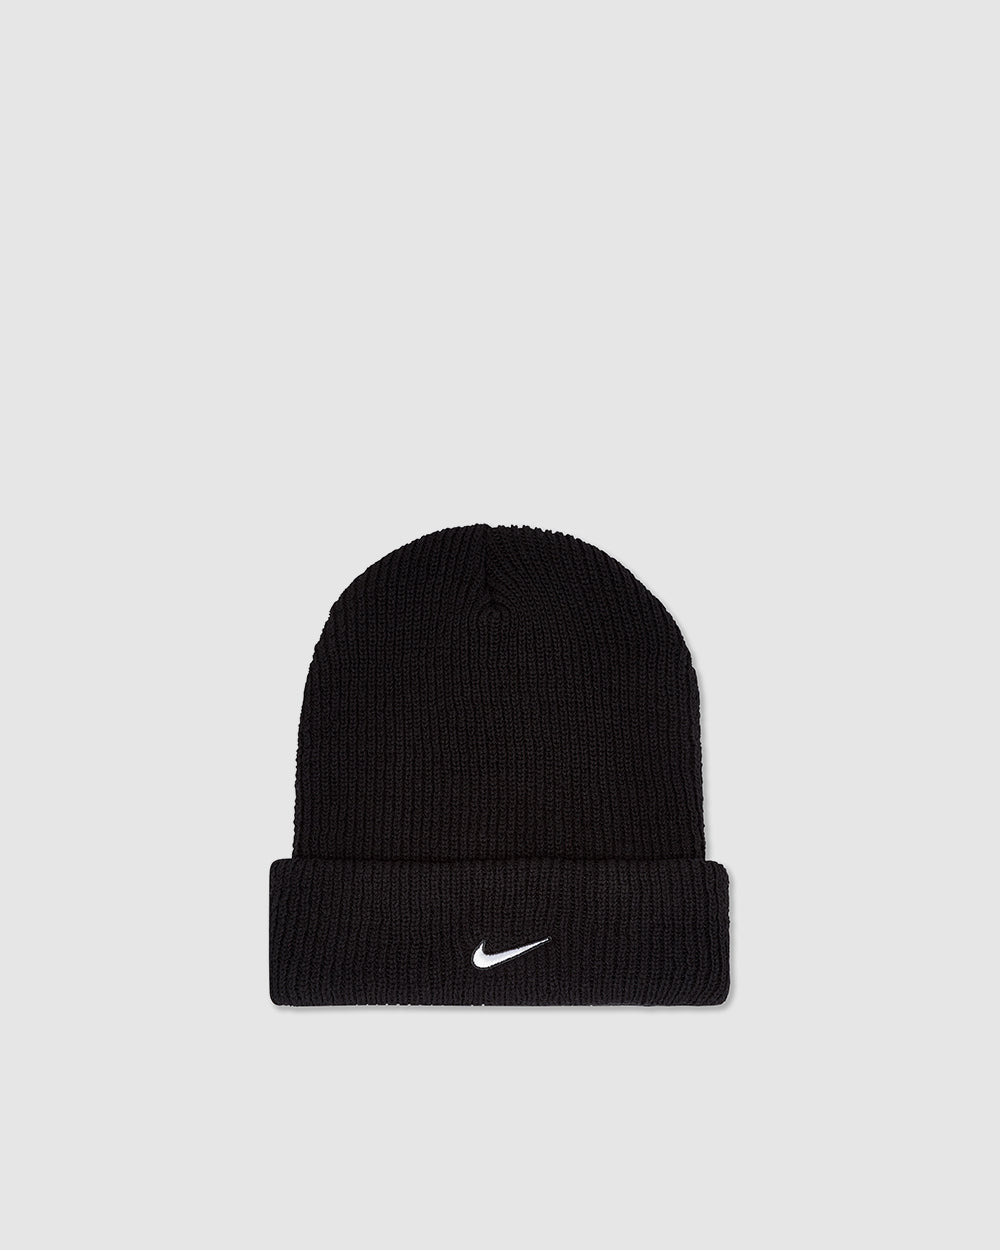 Product shot of a navy beanie